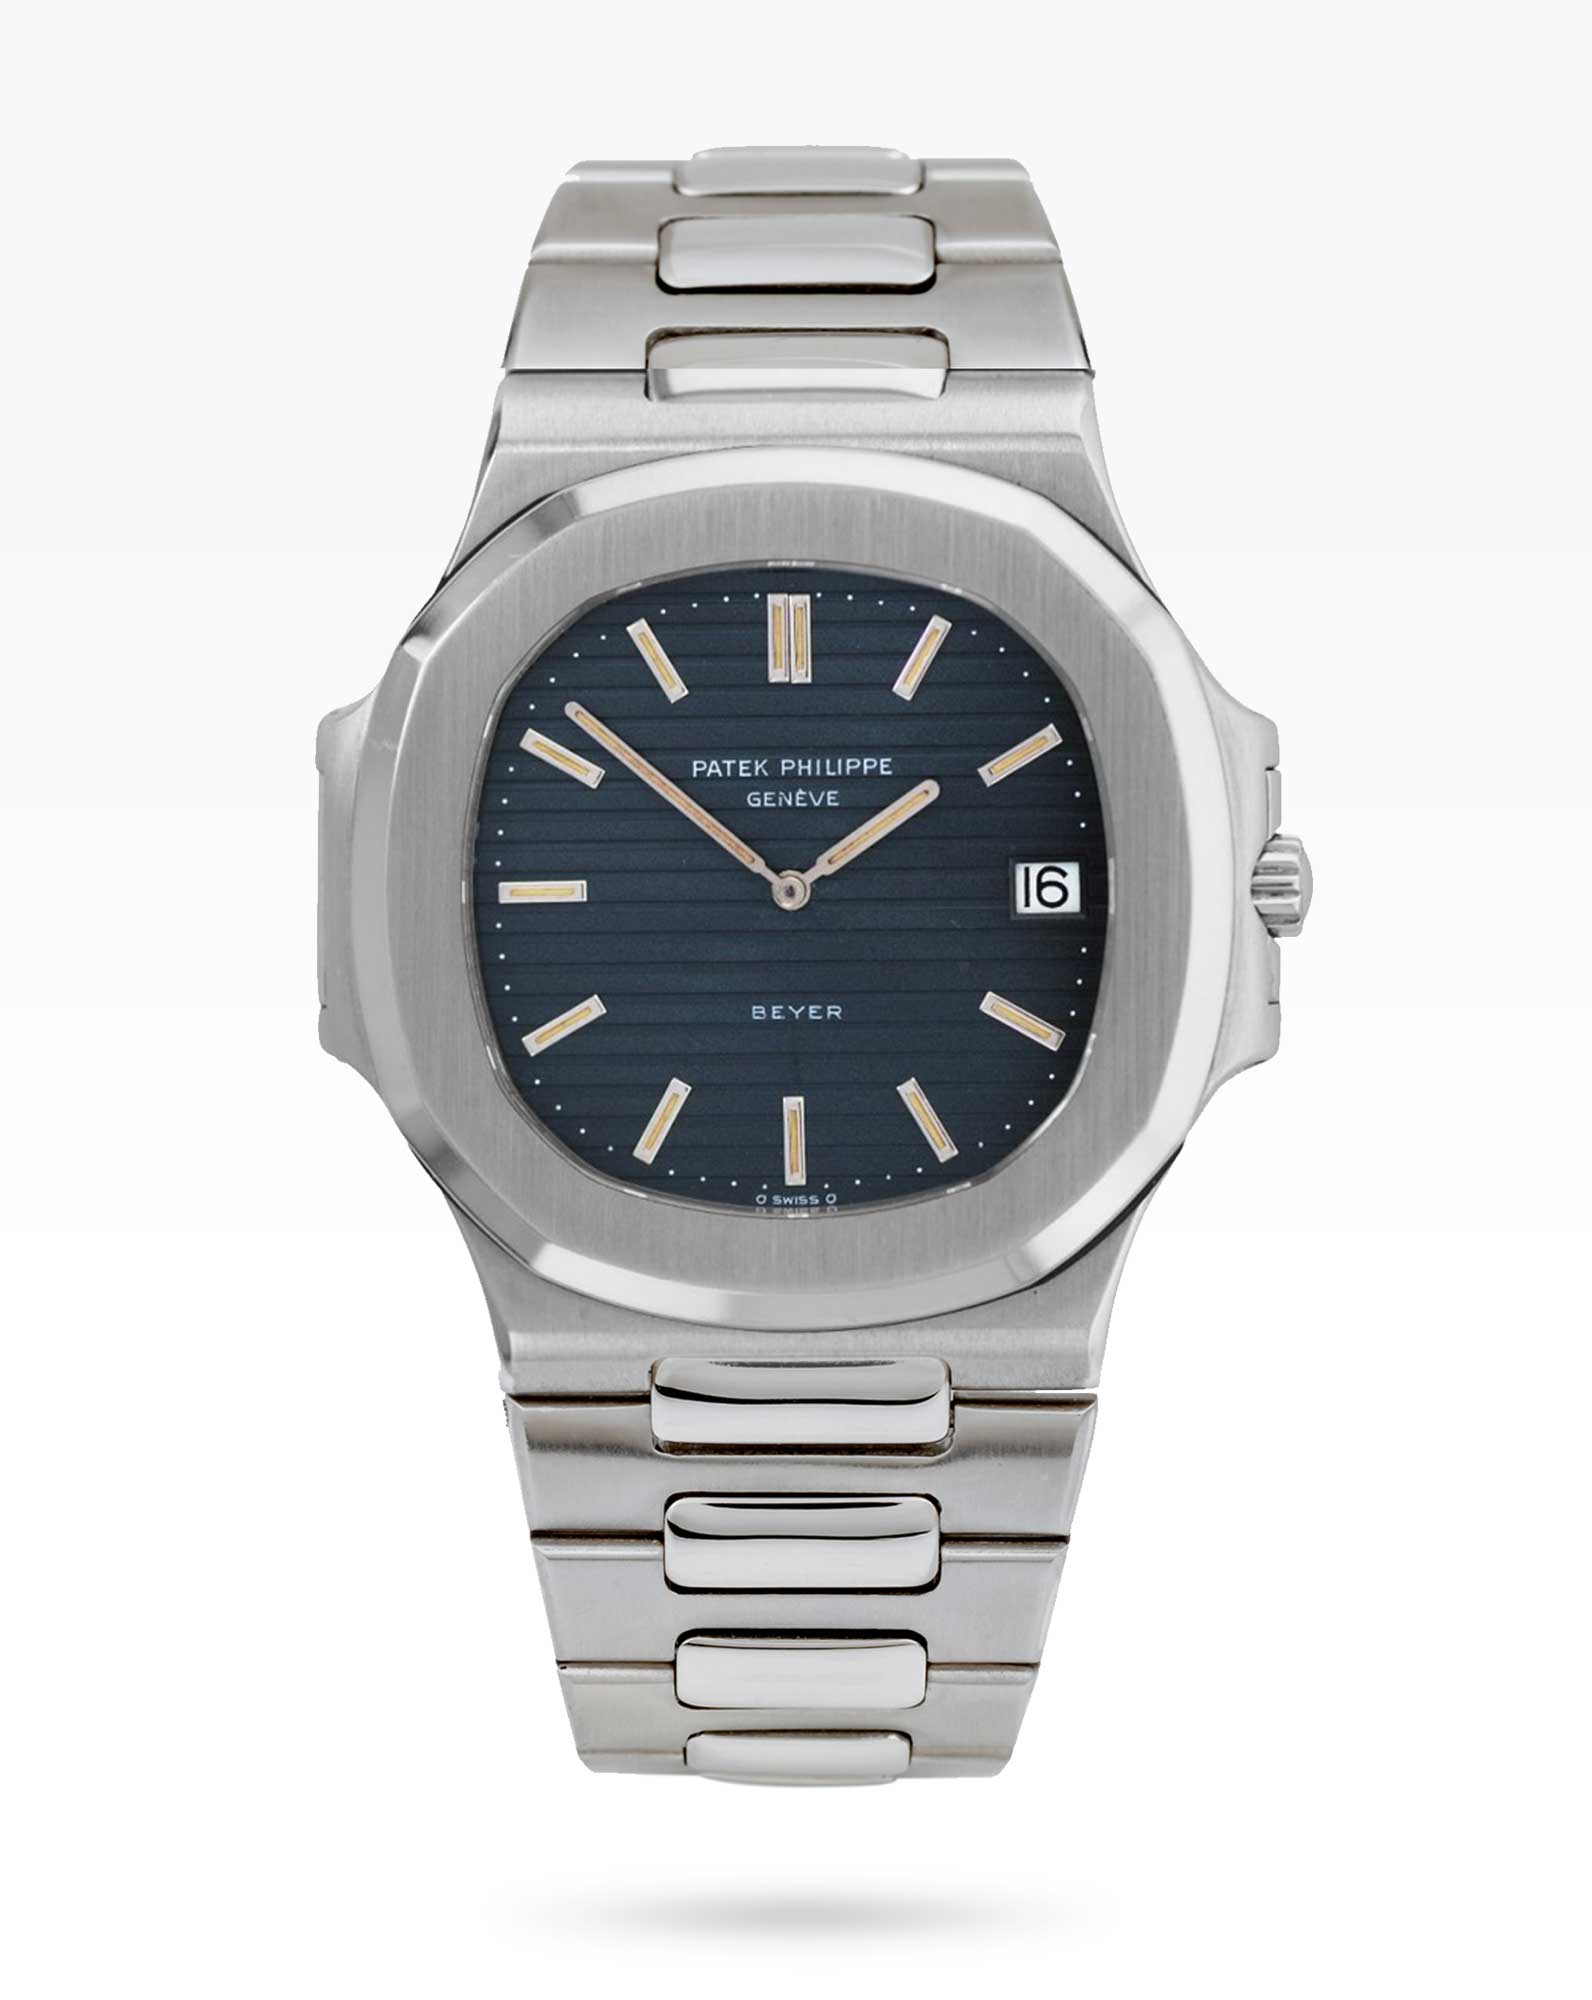 Vintage Patek philippe Nautilus Ref.3700 double-signed Beyer from 1980 - 2ToneVintae Watches